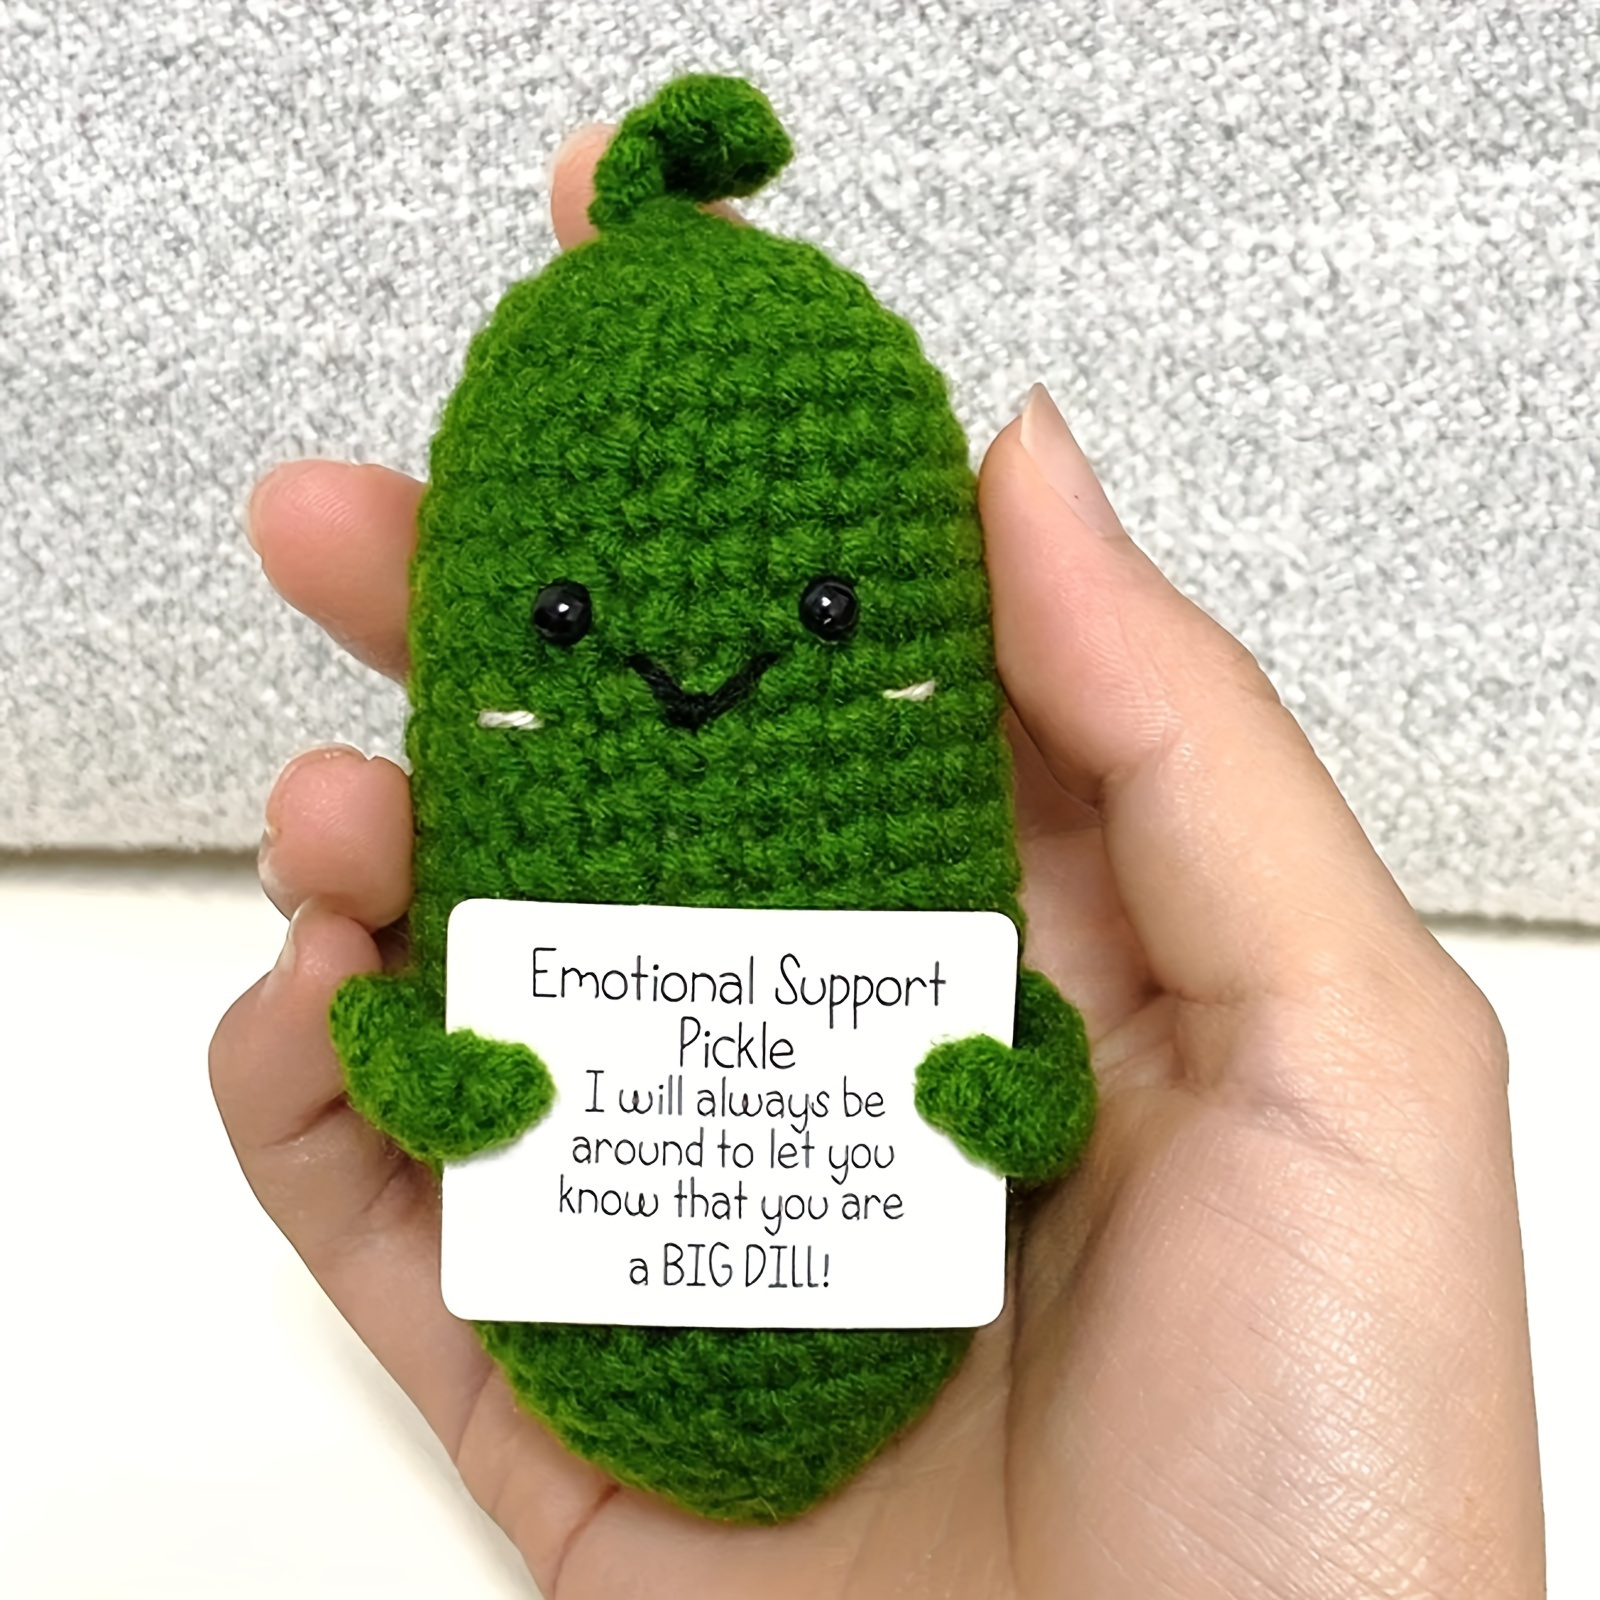 Emotional Support Pickle and Positive Potato,handmade Crochet Vegetables  Plush,valentine's Day Gift Stocking Stuffers,best Friend Gift 